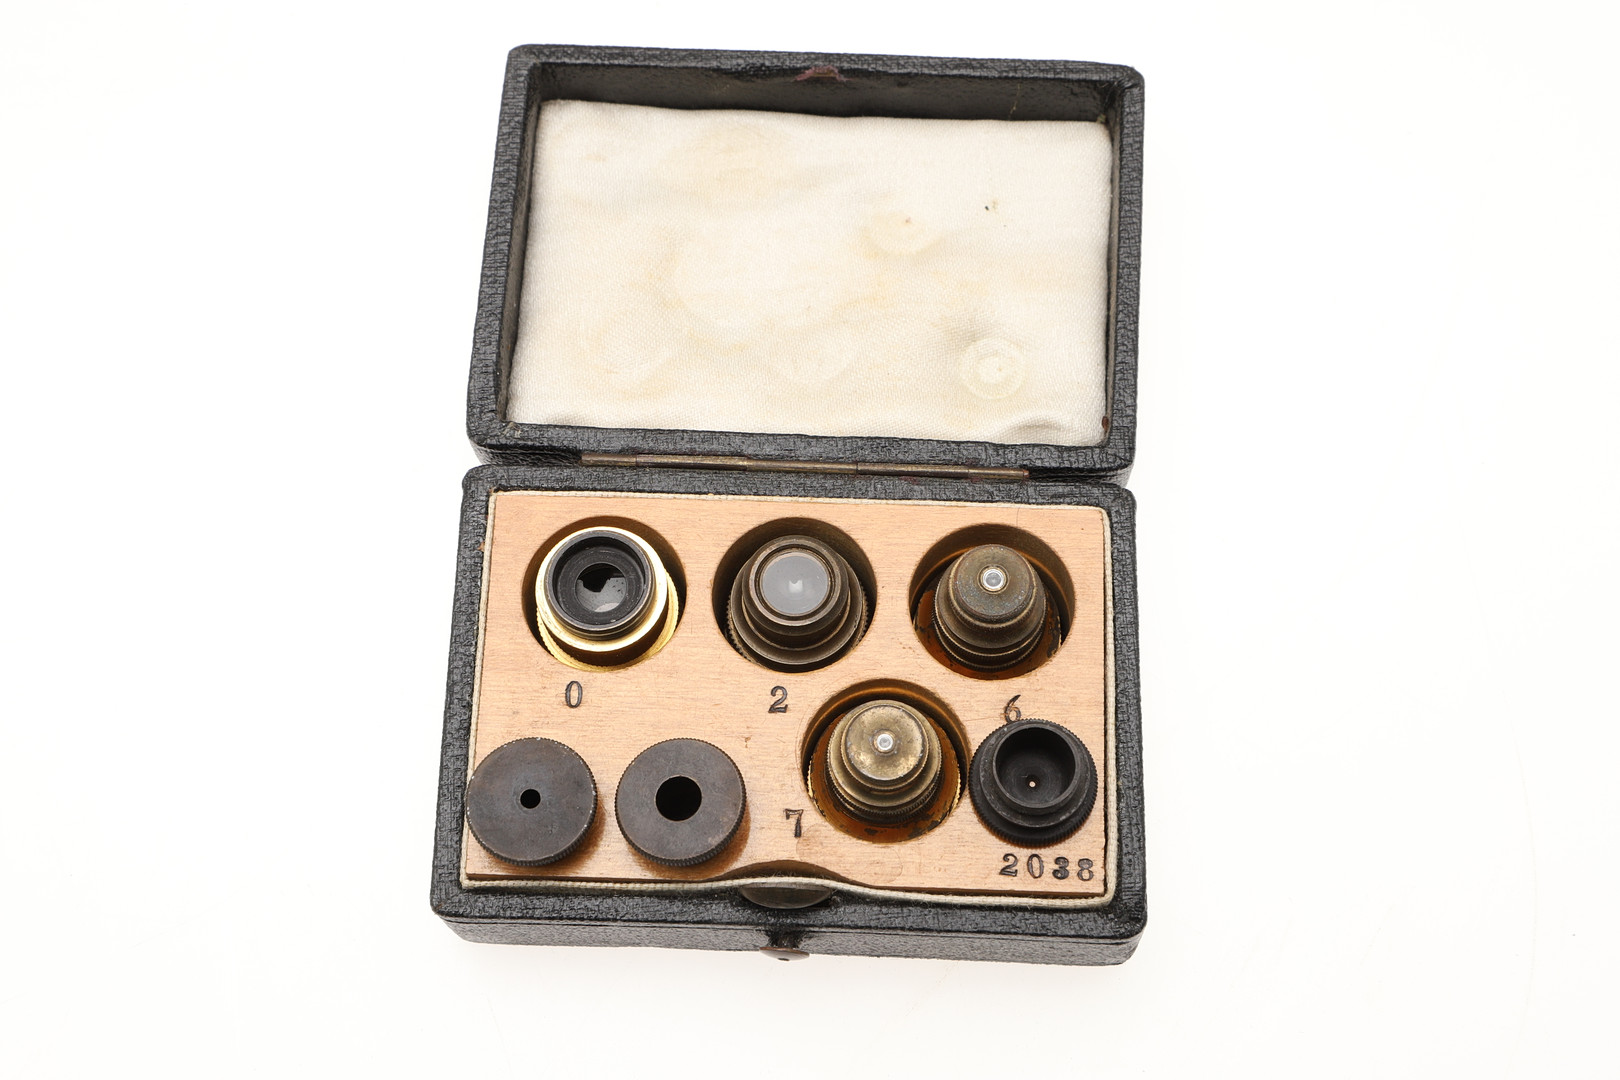 CONSTANT VERICK. A FRENCH LATE 19TH CENTURY CASED MICROSCOPE. - Image 12 of 18